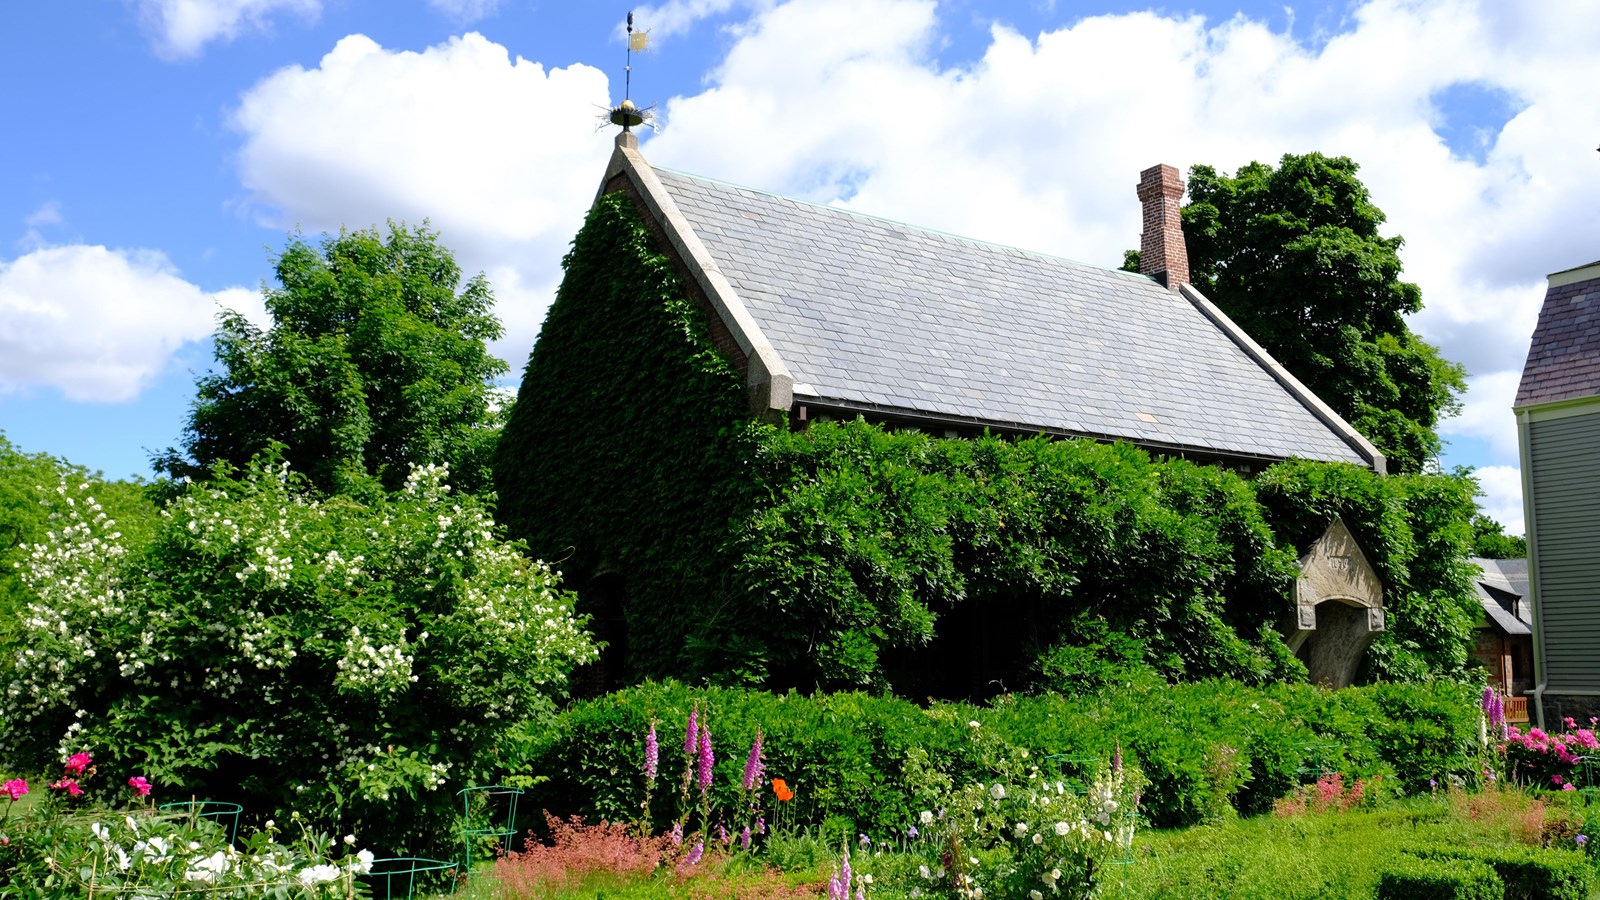 A stone and brick building with a chimney and weathervane, covered in leafy green vines.